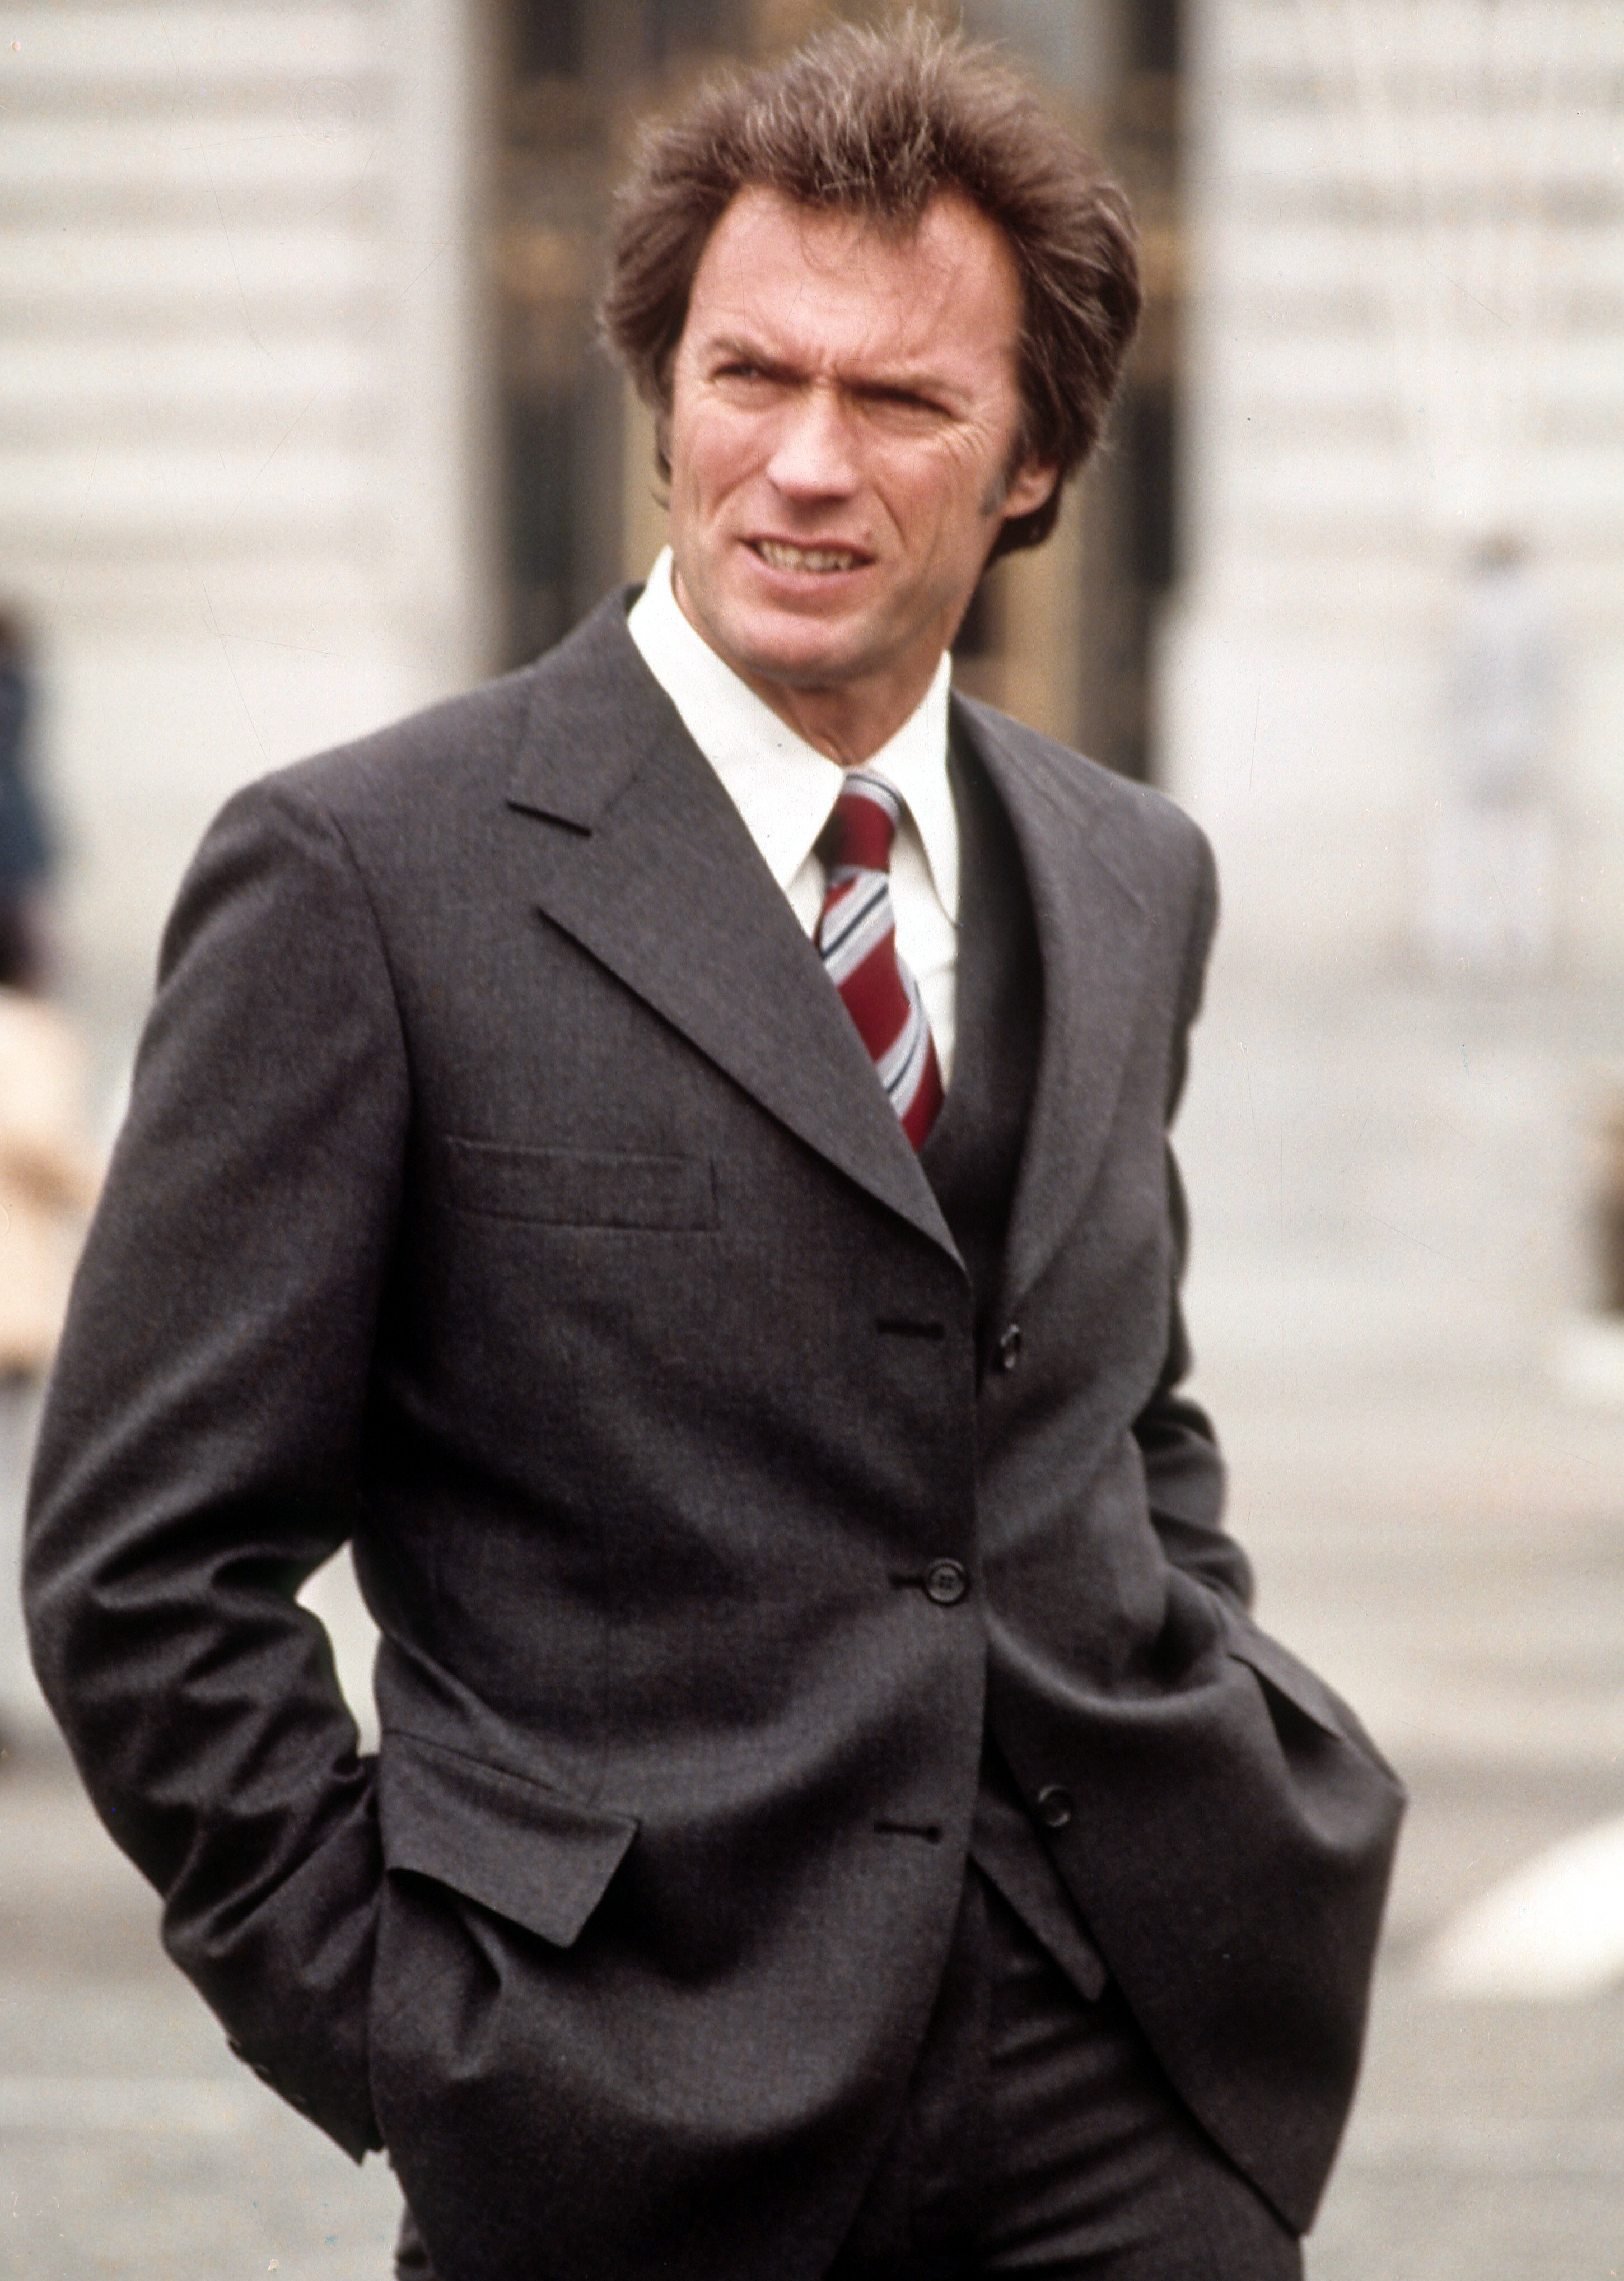 Clint Eastwood in a scene from "Dirty Harry" in 1971 | Source: Getty Images